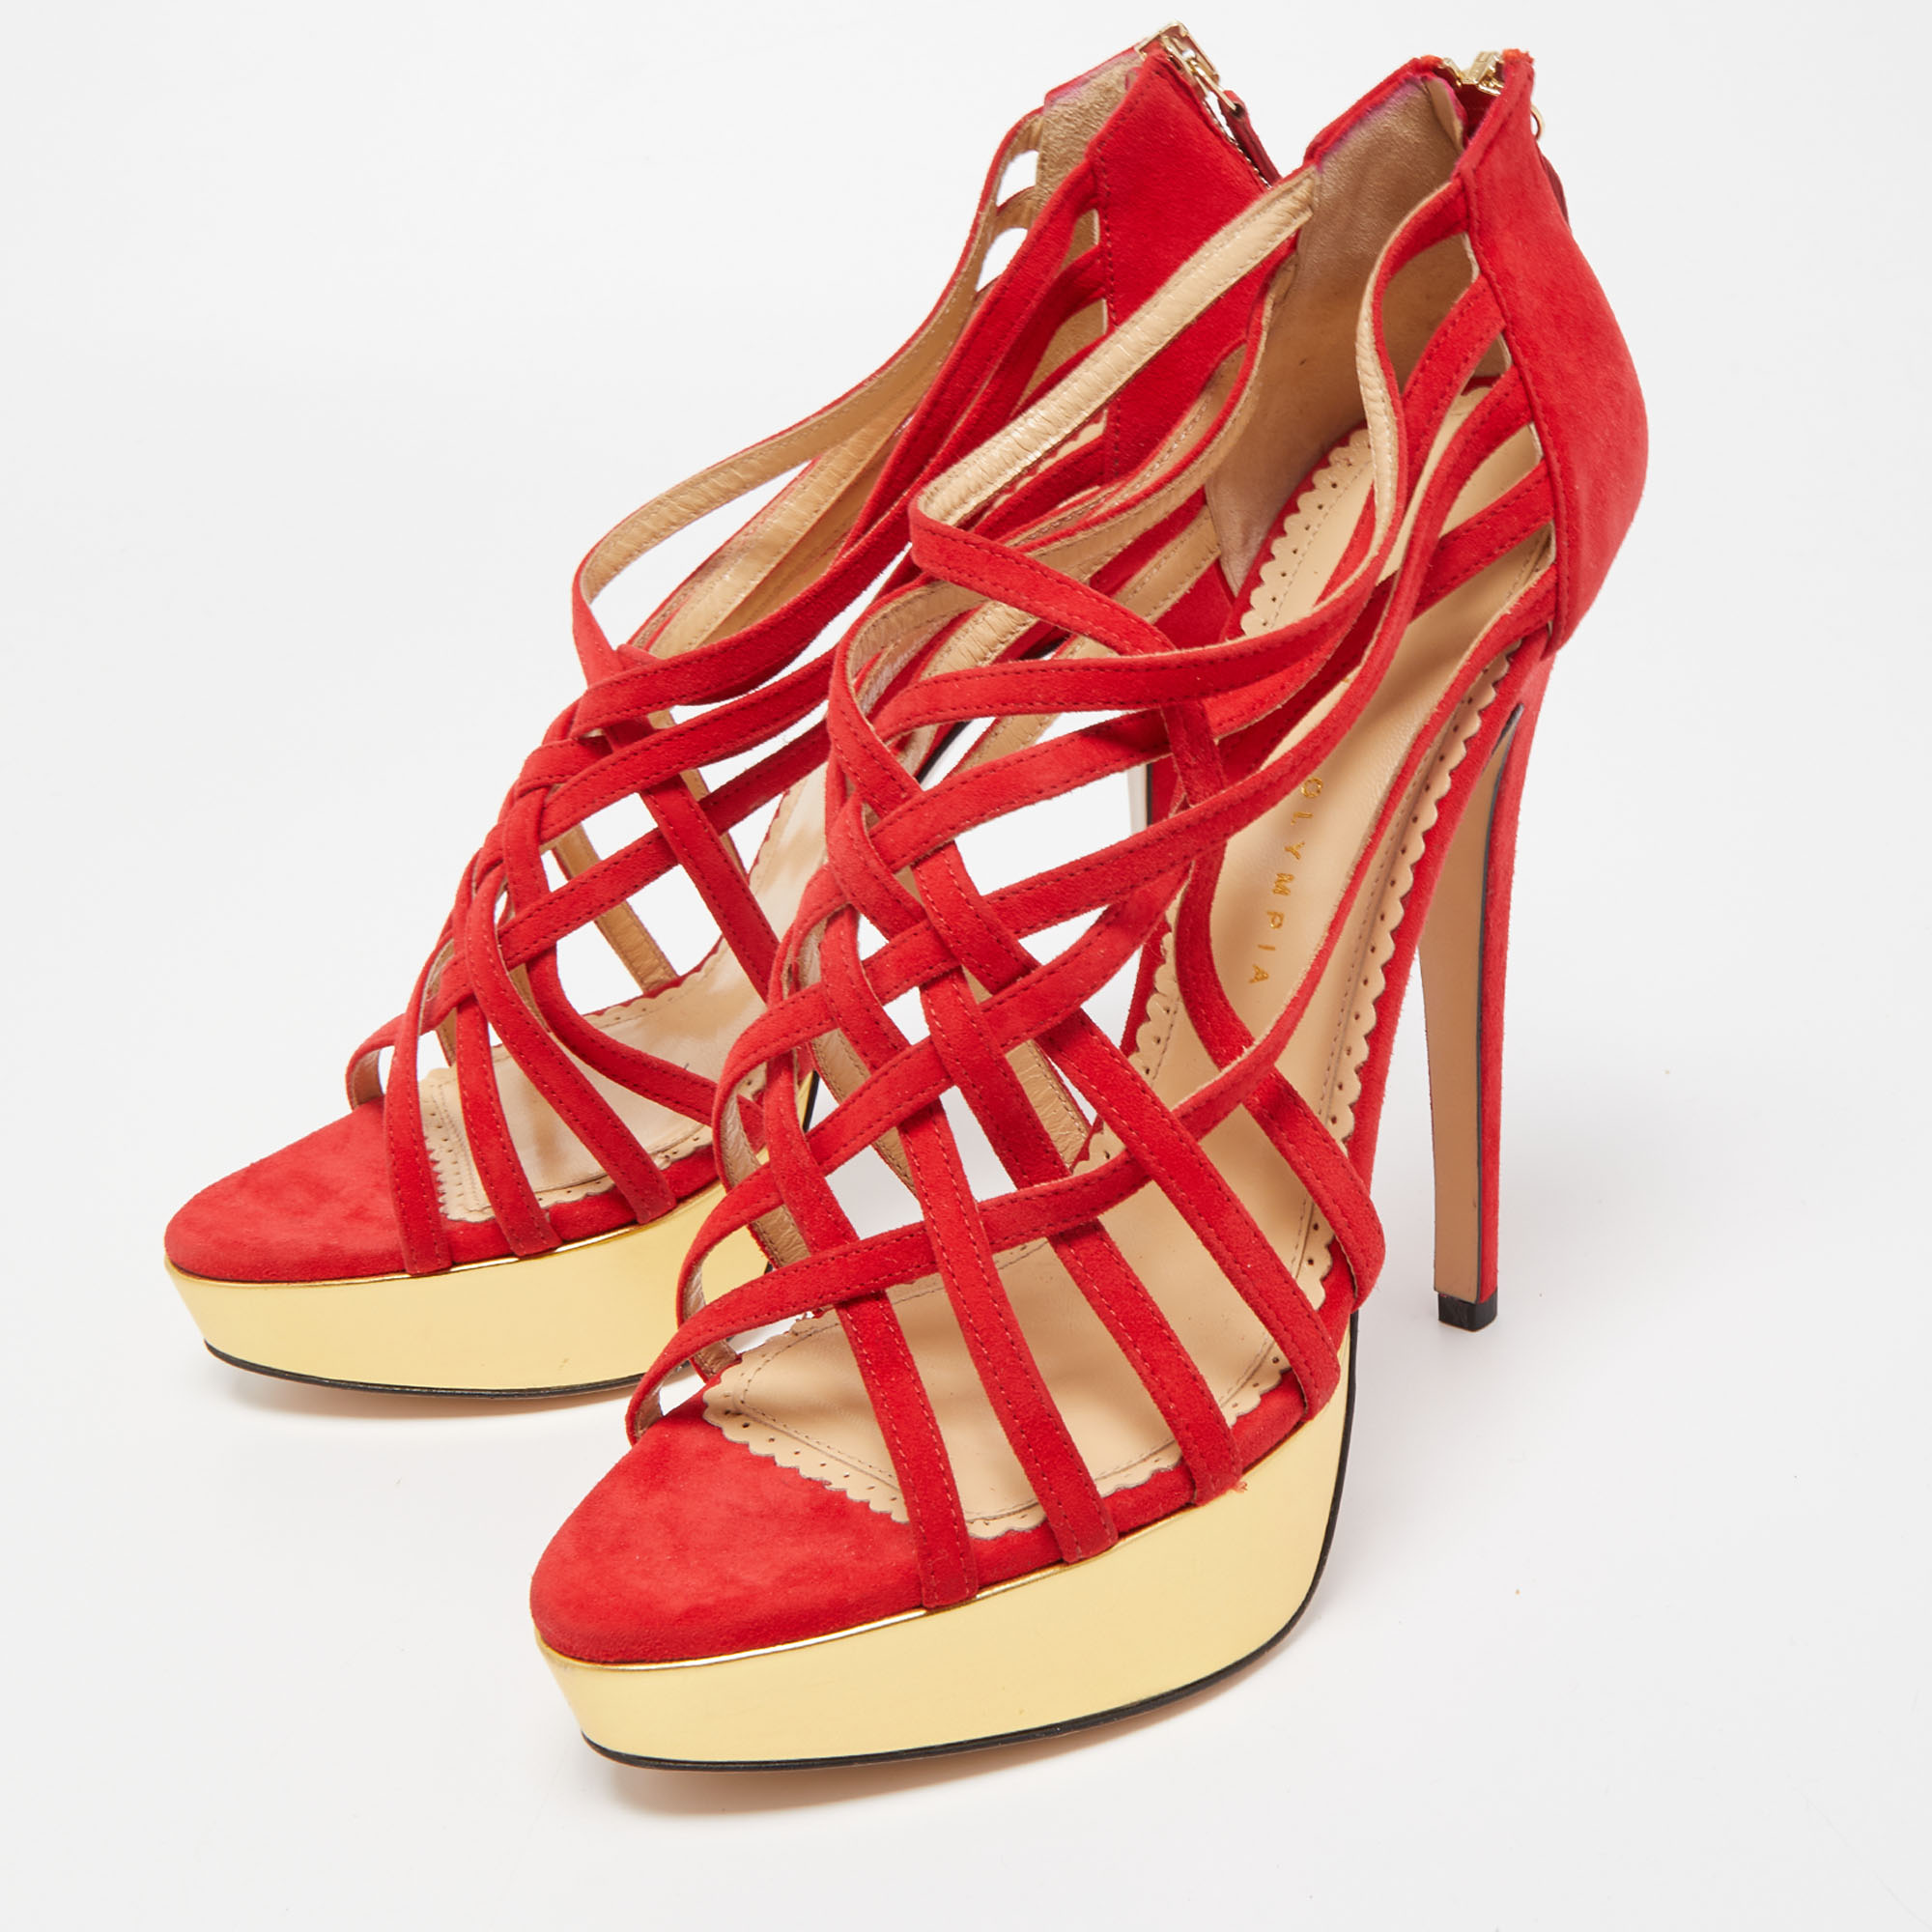 

Charlotte Olympia Red Suede Strappy Platform Sandals Size